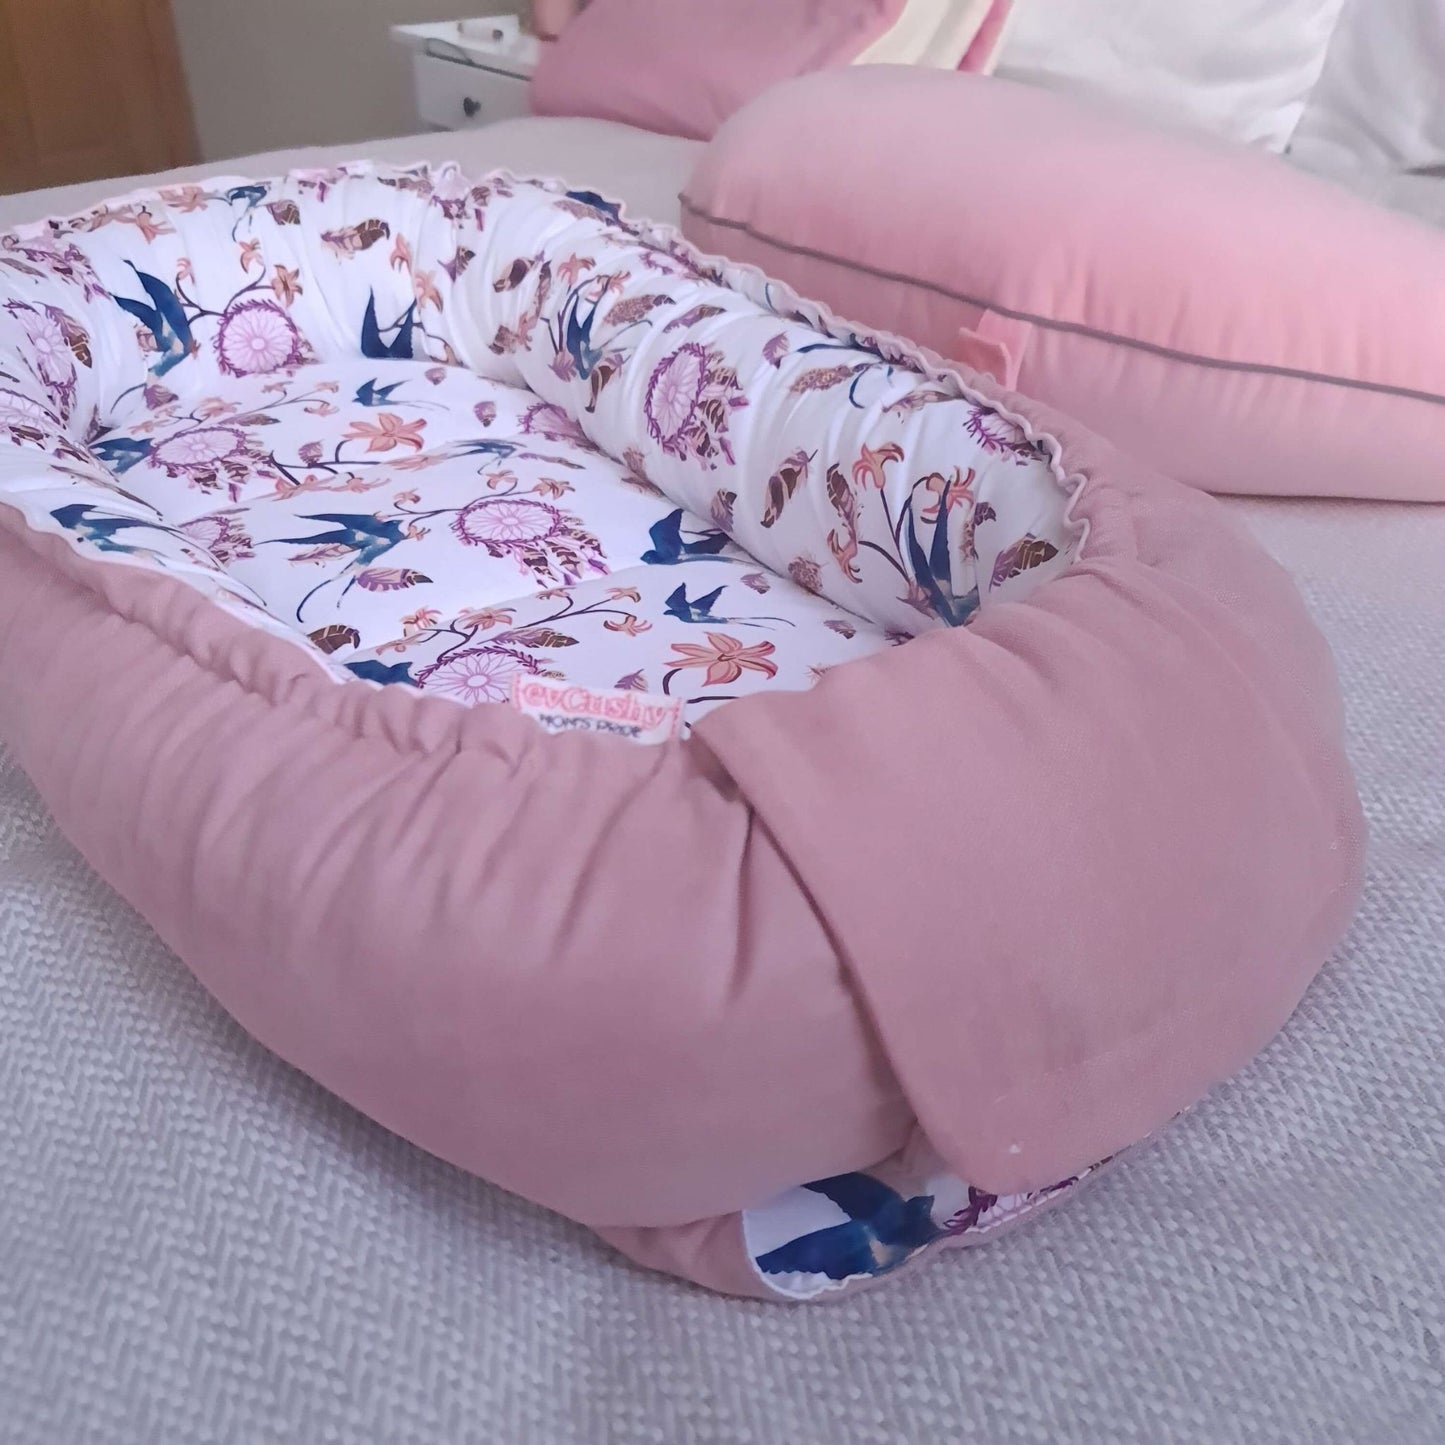 best baby nest for lounging and resting